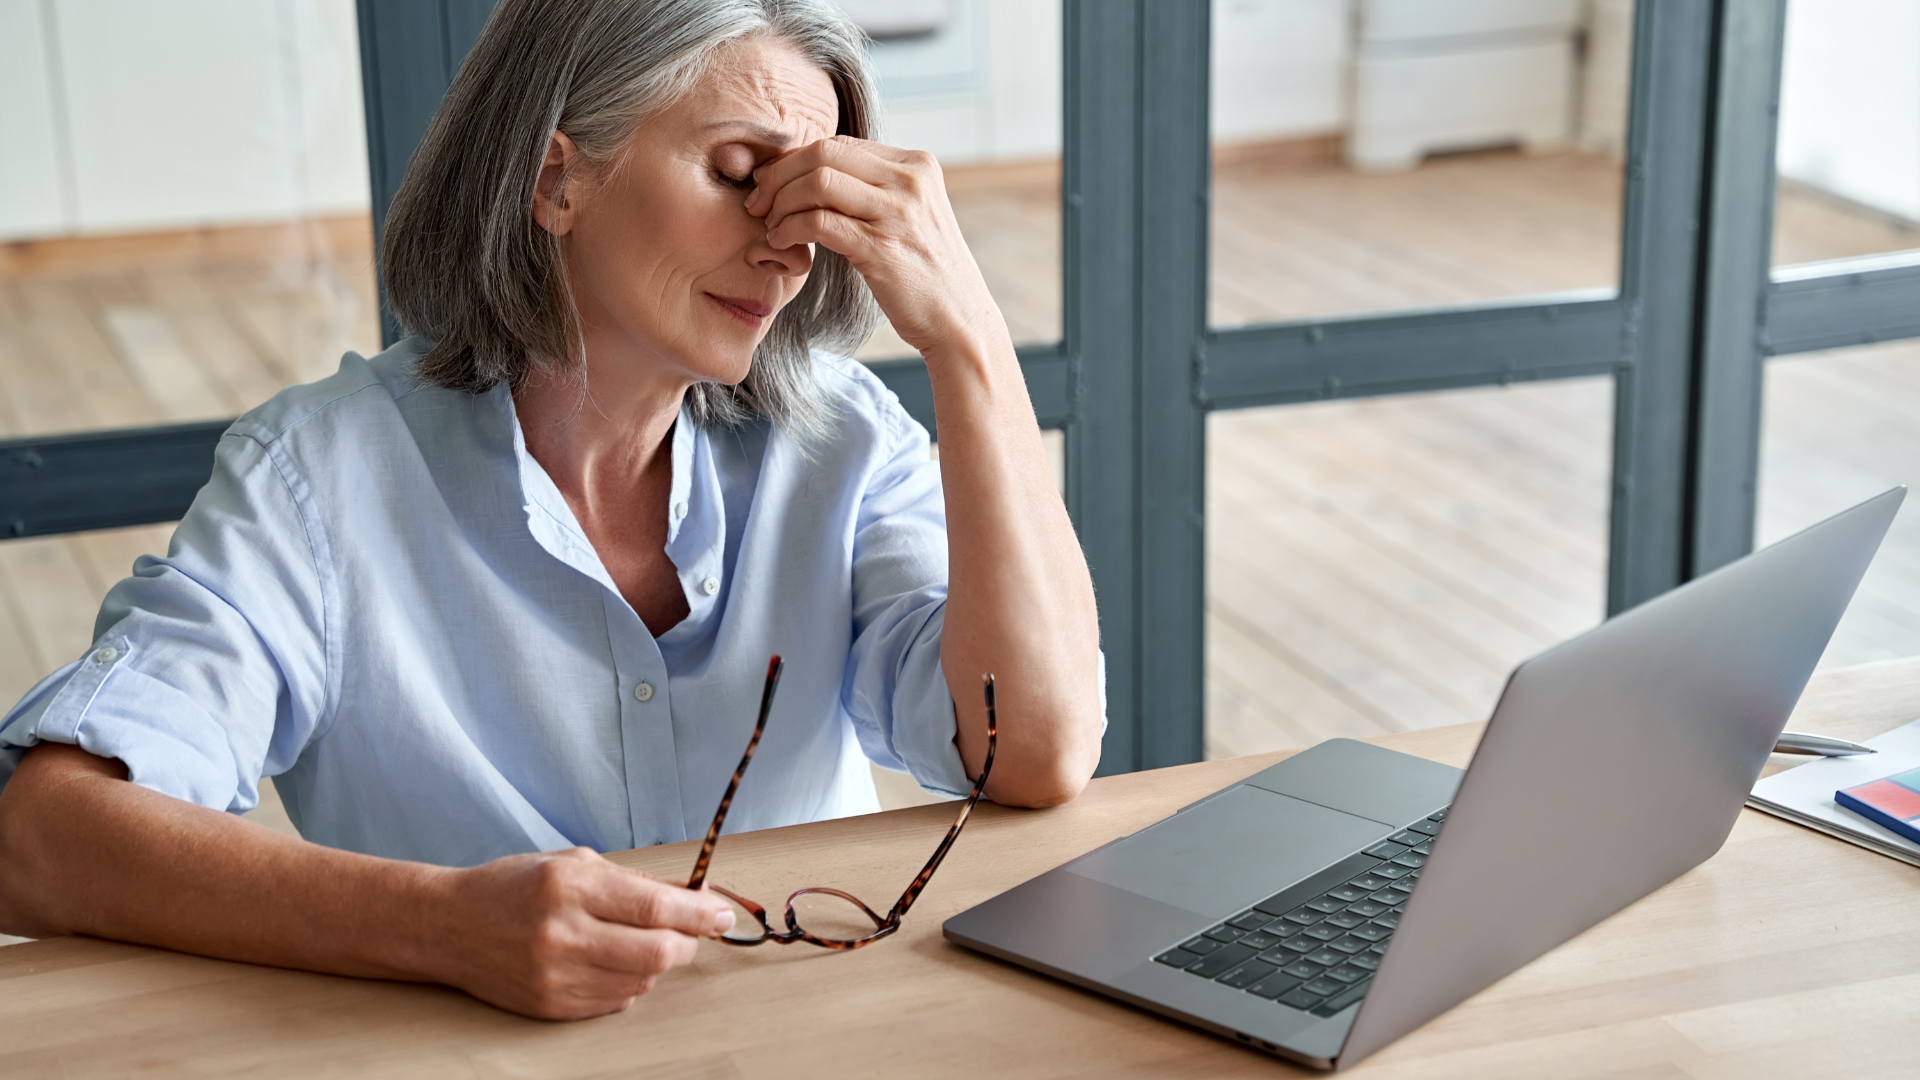 Overworked and stressed mature senior business woman suffering from fatigue, headache, having eyesight problem after computer work. Overwork and stress can contribute to diseases like osteoporosis.